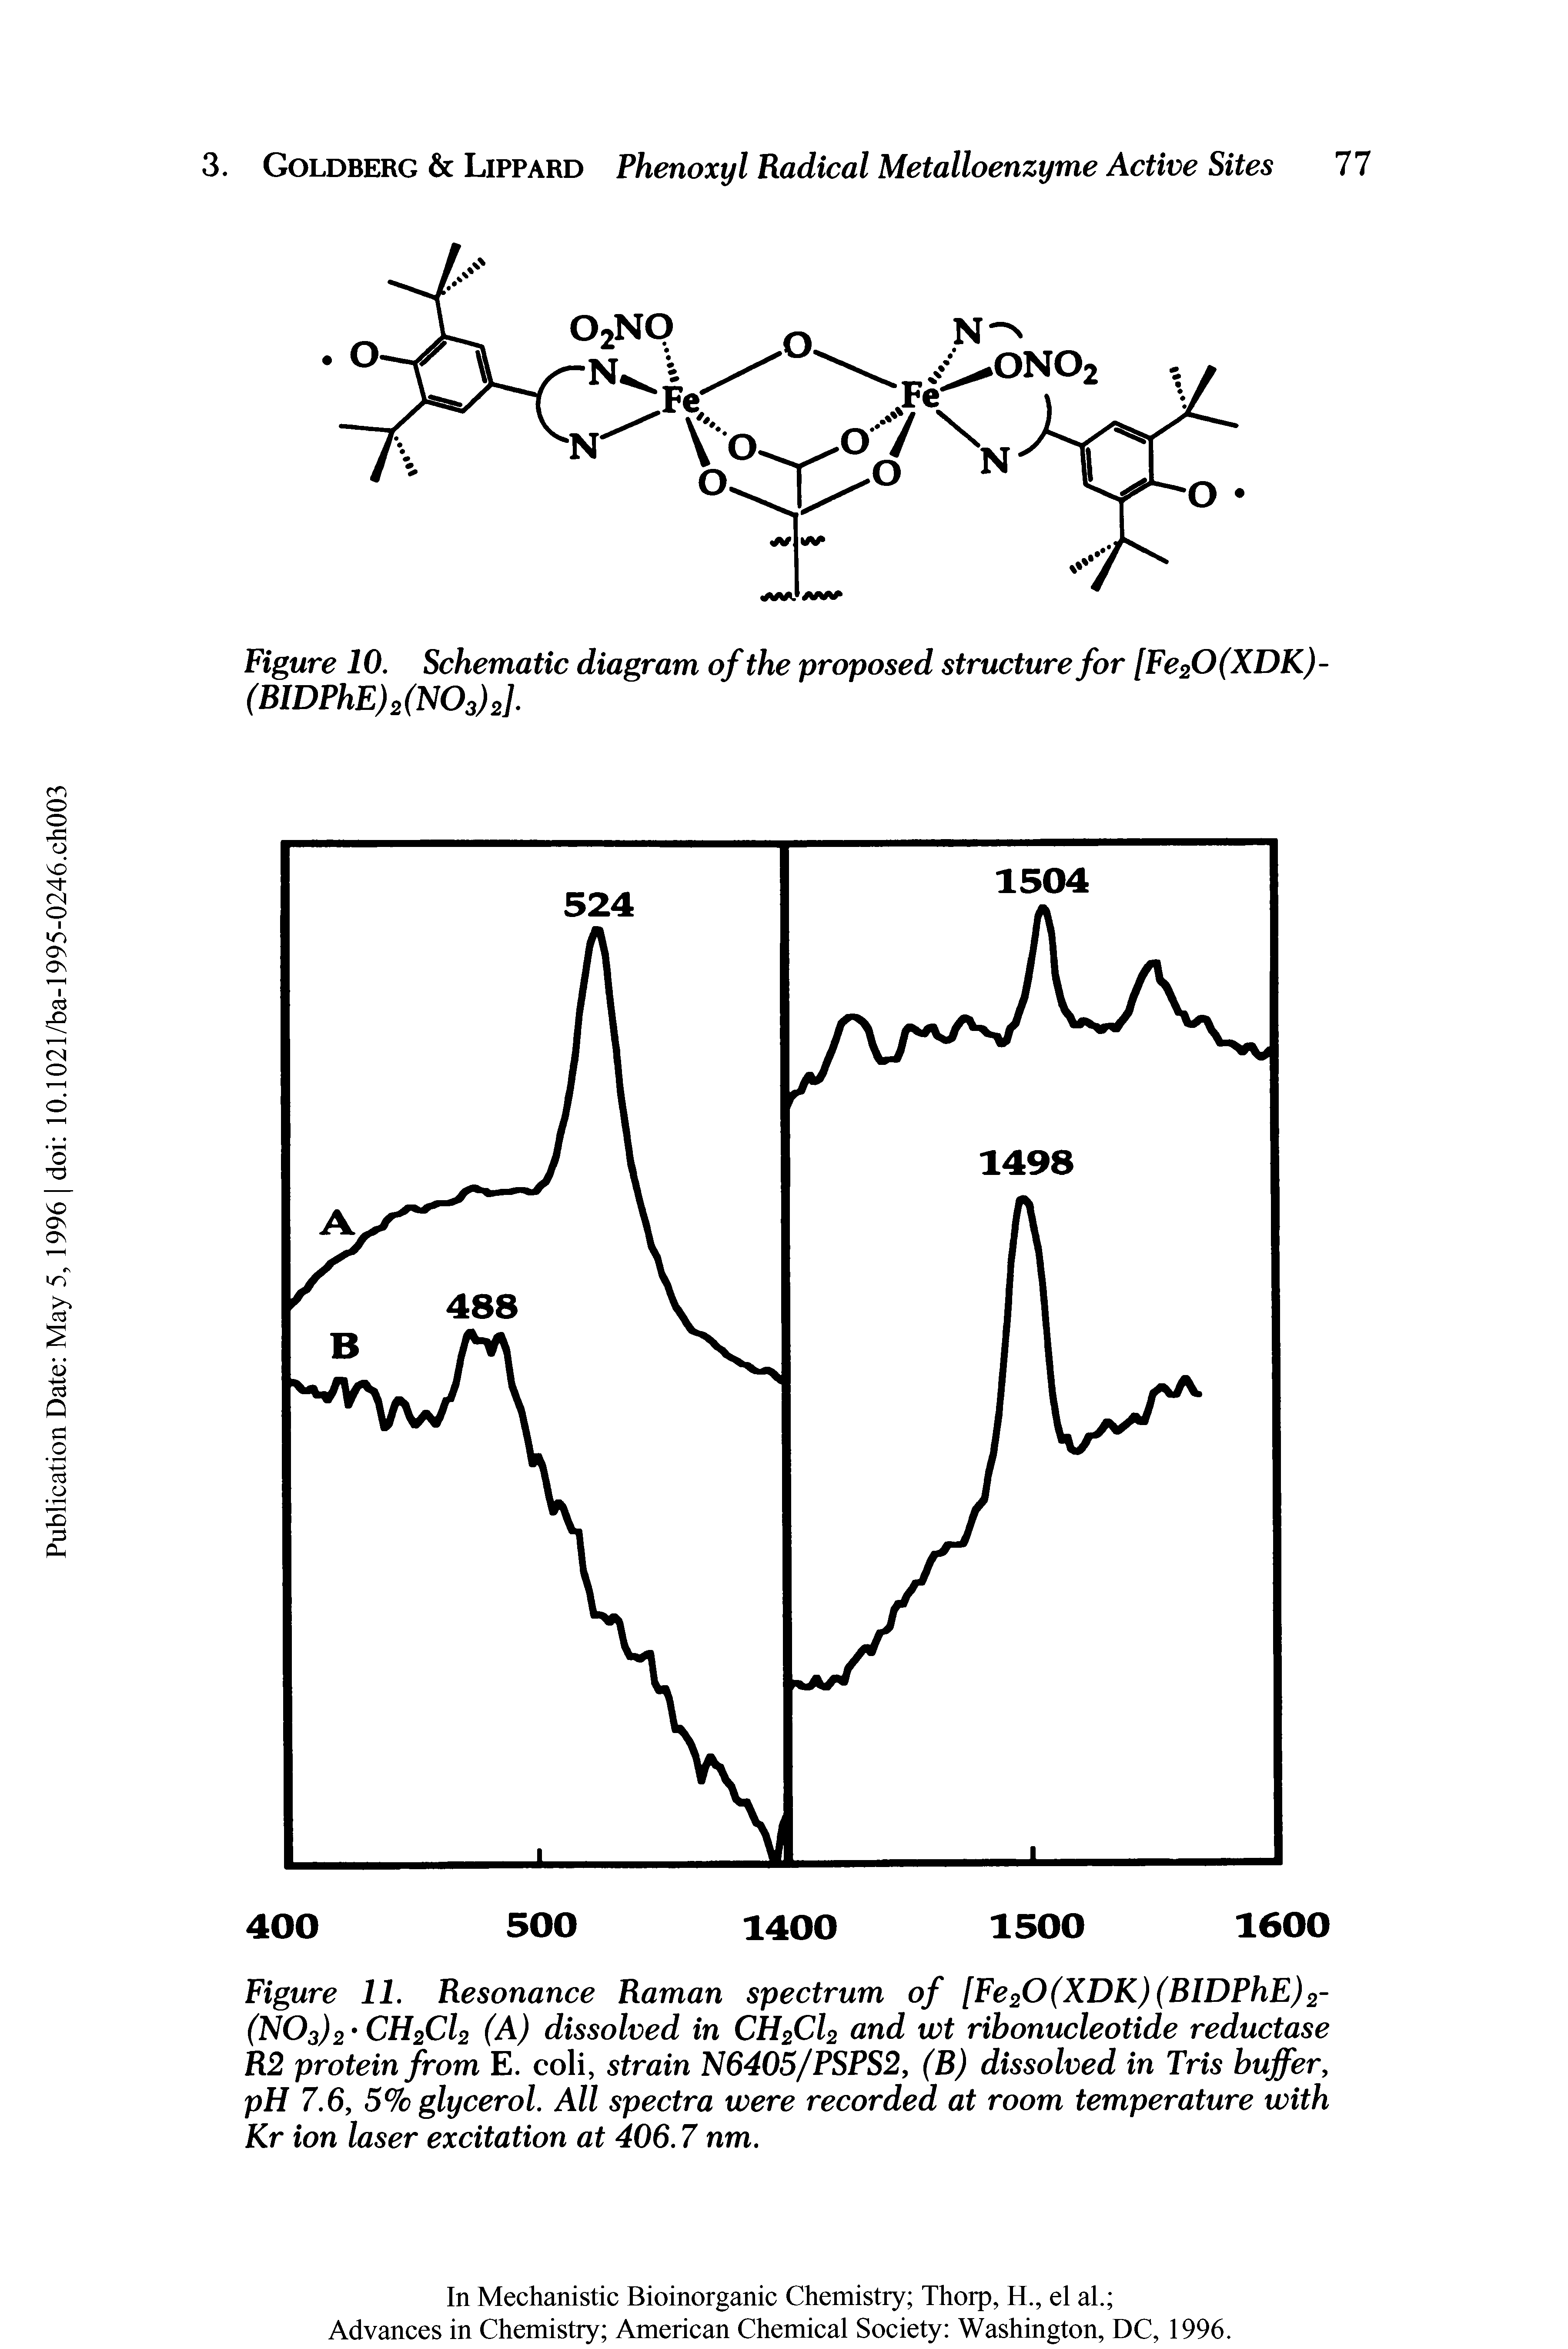 Figure 11. Resonance Raman spectrum of [Fe20(XDK)(BIDPhE)2-(N03)2 CH2Cl2 (A) dissolved in CH2Cl2 and wt ribonucleotide reductase R2 protein from E. coli, strain N6405/PSPS2, (B) dissolved in Tris buffer, pH 7.6, 5% glycerol. All spectra were recorded at room temperature with Kr ion laser excitation at 406.7 nm.